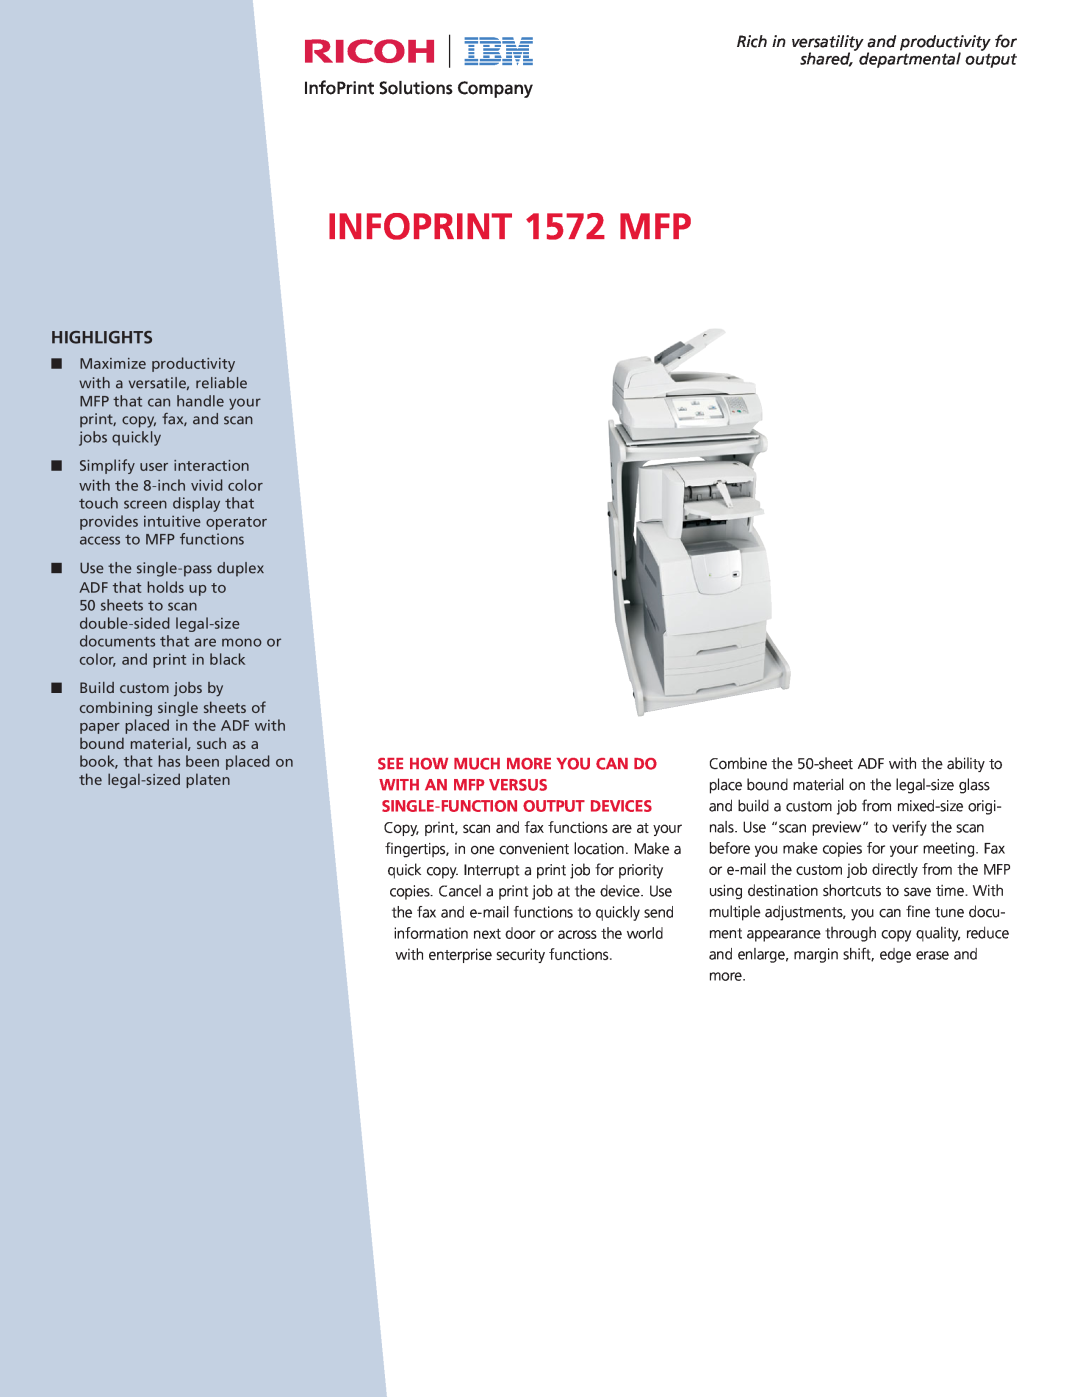 Ricoh manual See How Much More You Can Do, With An Mfp Versus, Single-Function Output Devices, INFOPRINT 1572 MFP 